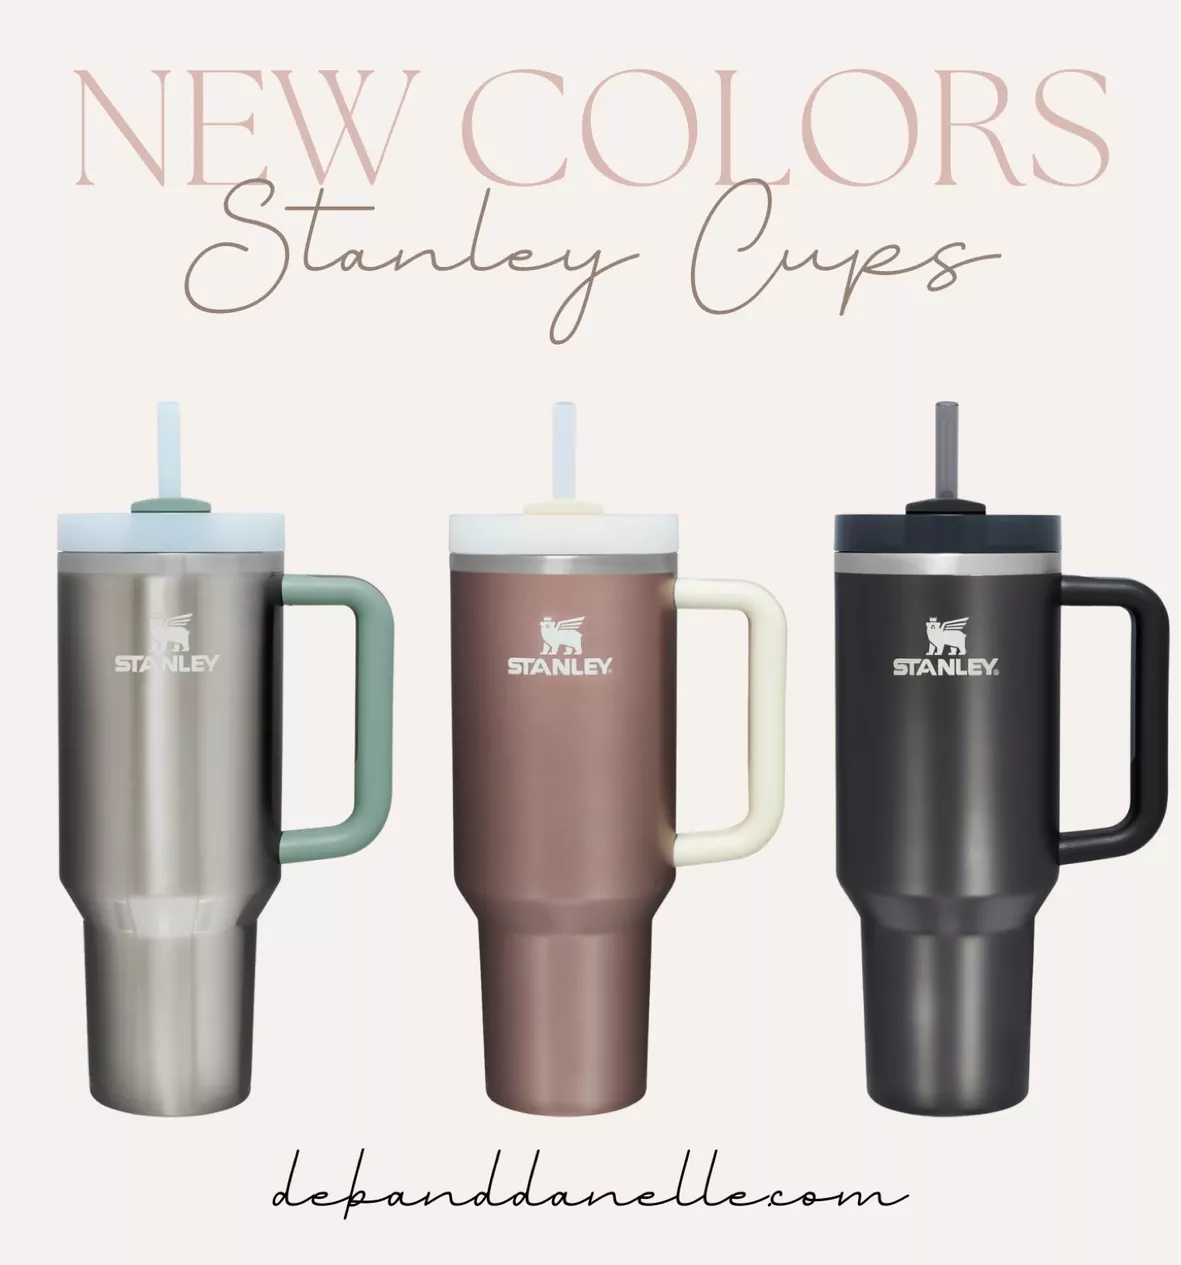 Sneak Preview: Two New Quencher Colors - Stanley